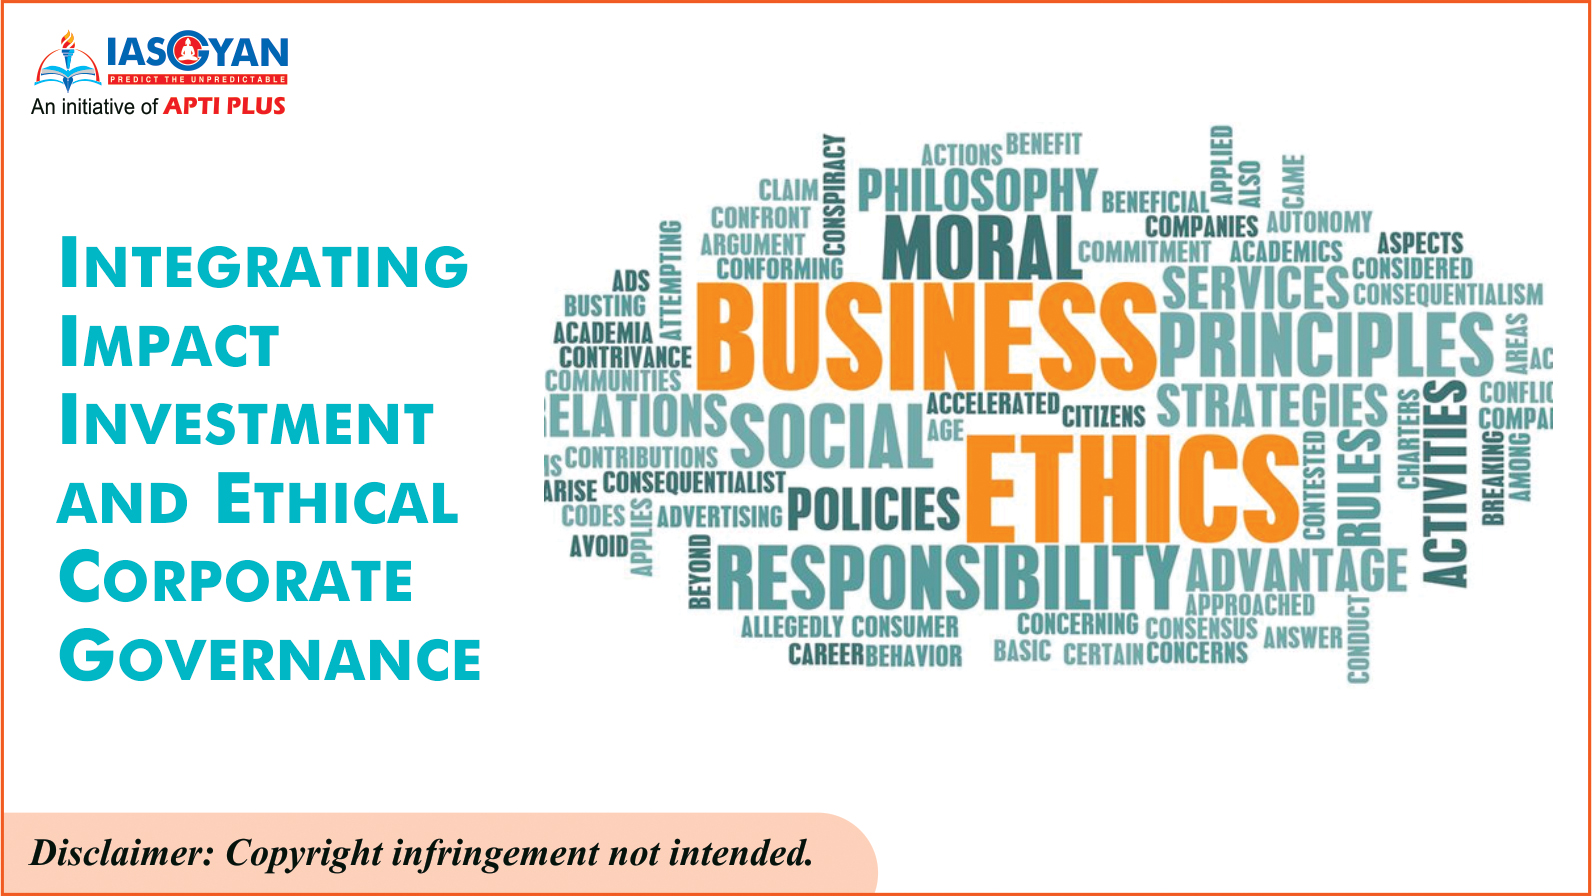 INTEGRATING IMPACT INVESTMENT AND ETHICAL CORPORATE GOVERNANCE